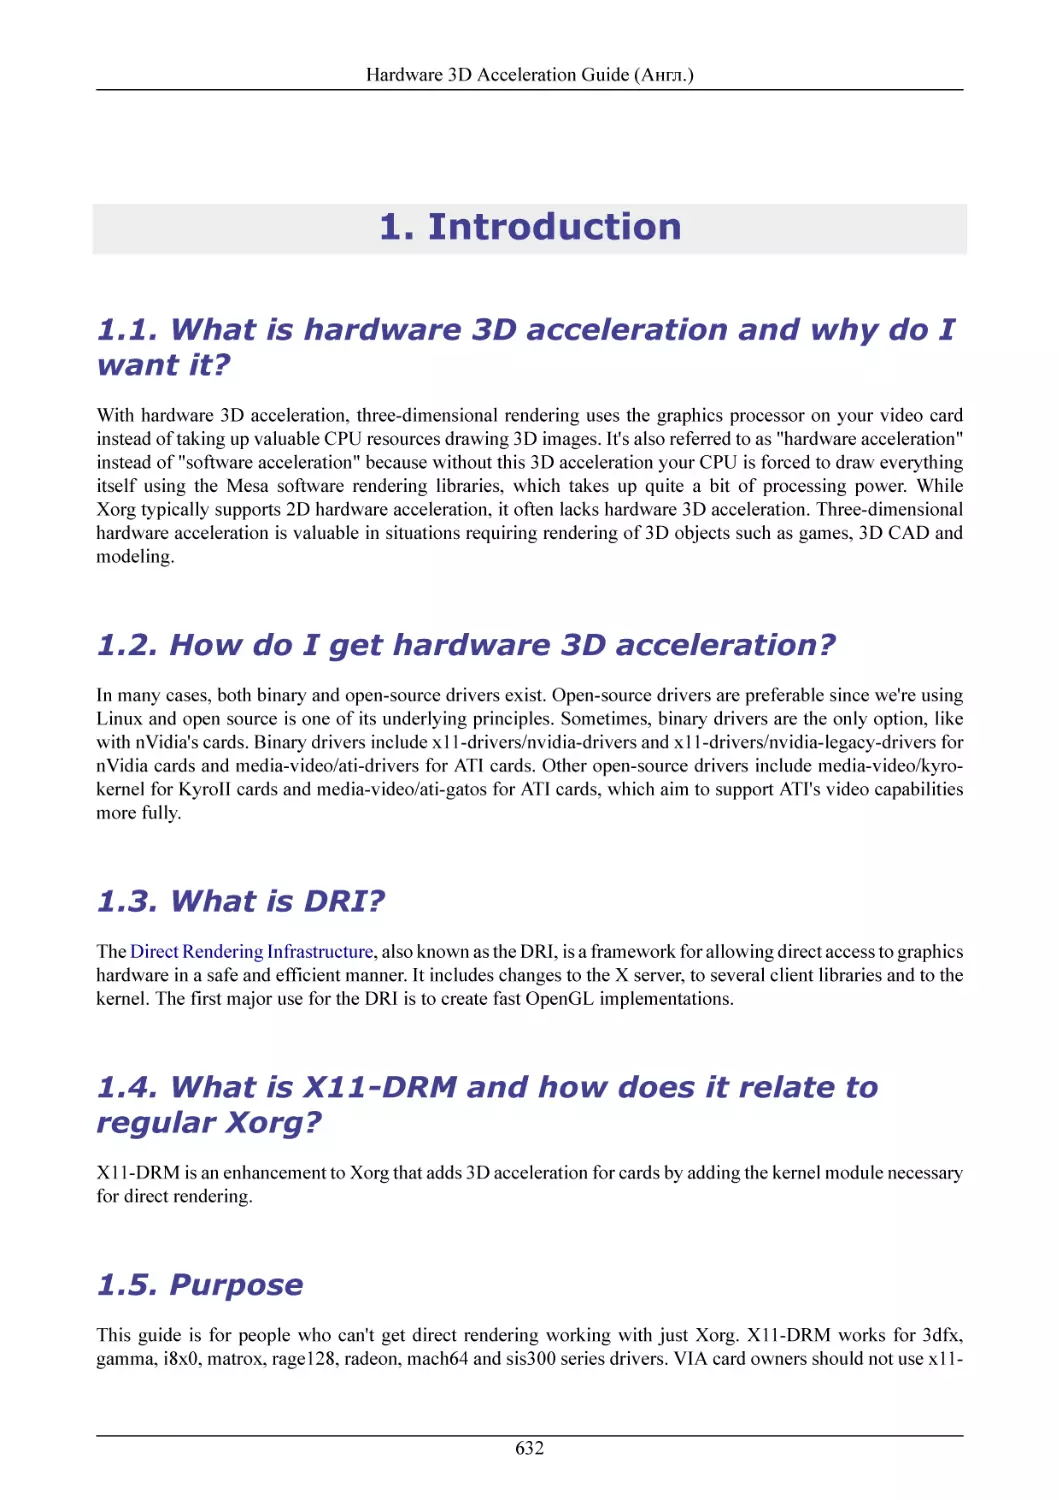 Introduction
What is hardware 3D acceleration and why do I want
How do I get hardware 3D acceleration?
What is DRI?
What is X11-DRM and how does it relate to regular
Purpose